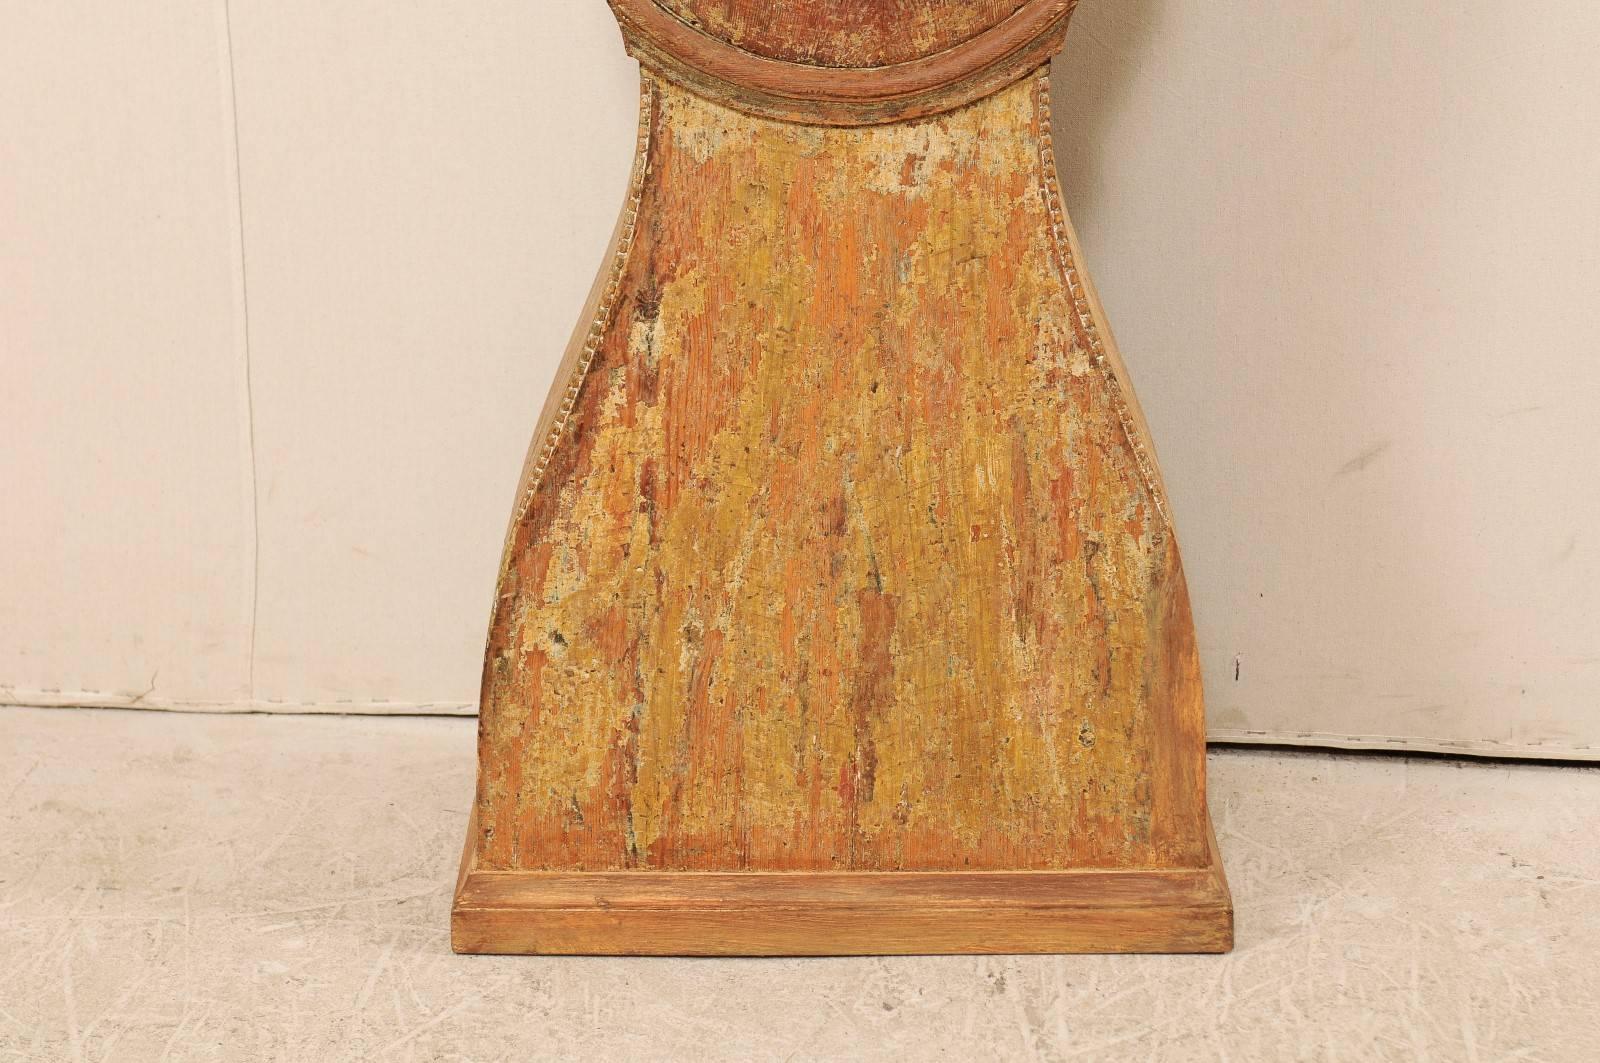 19th Century Swedish Painted Wood Longcase / Floor Clock with Scraped Finish For Sale 5